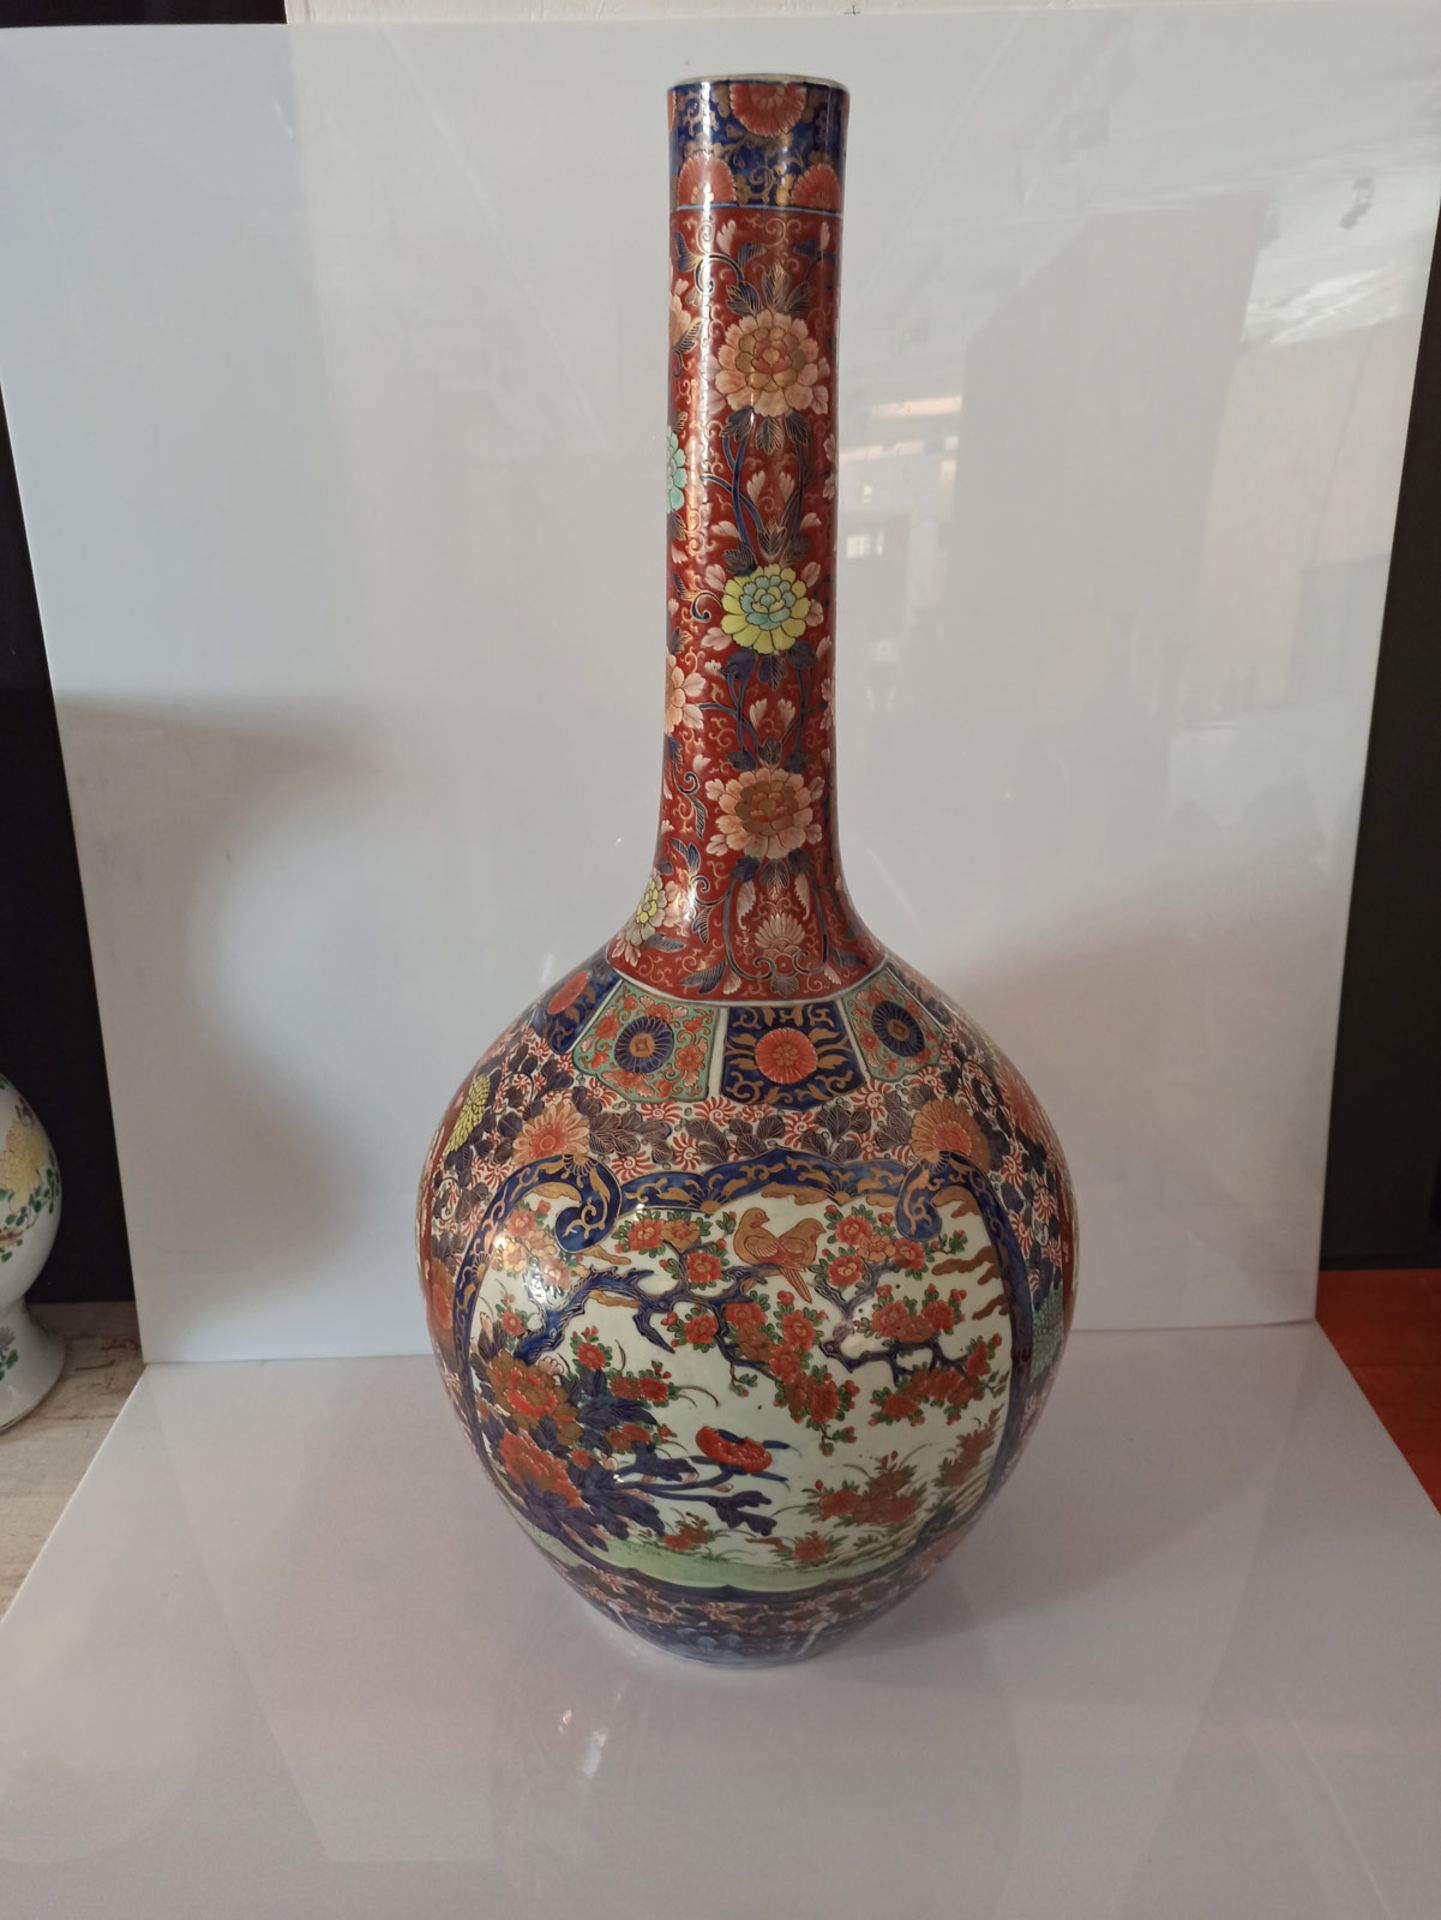 A LARGE NARROW-NECKED IMARI PORCELAIN VASE DECORATED WITH BIRDS AND FLOWERS - Image 3 of 9